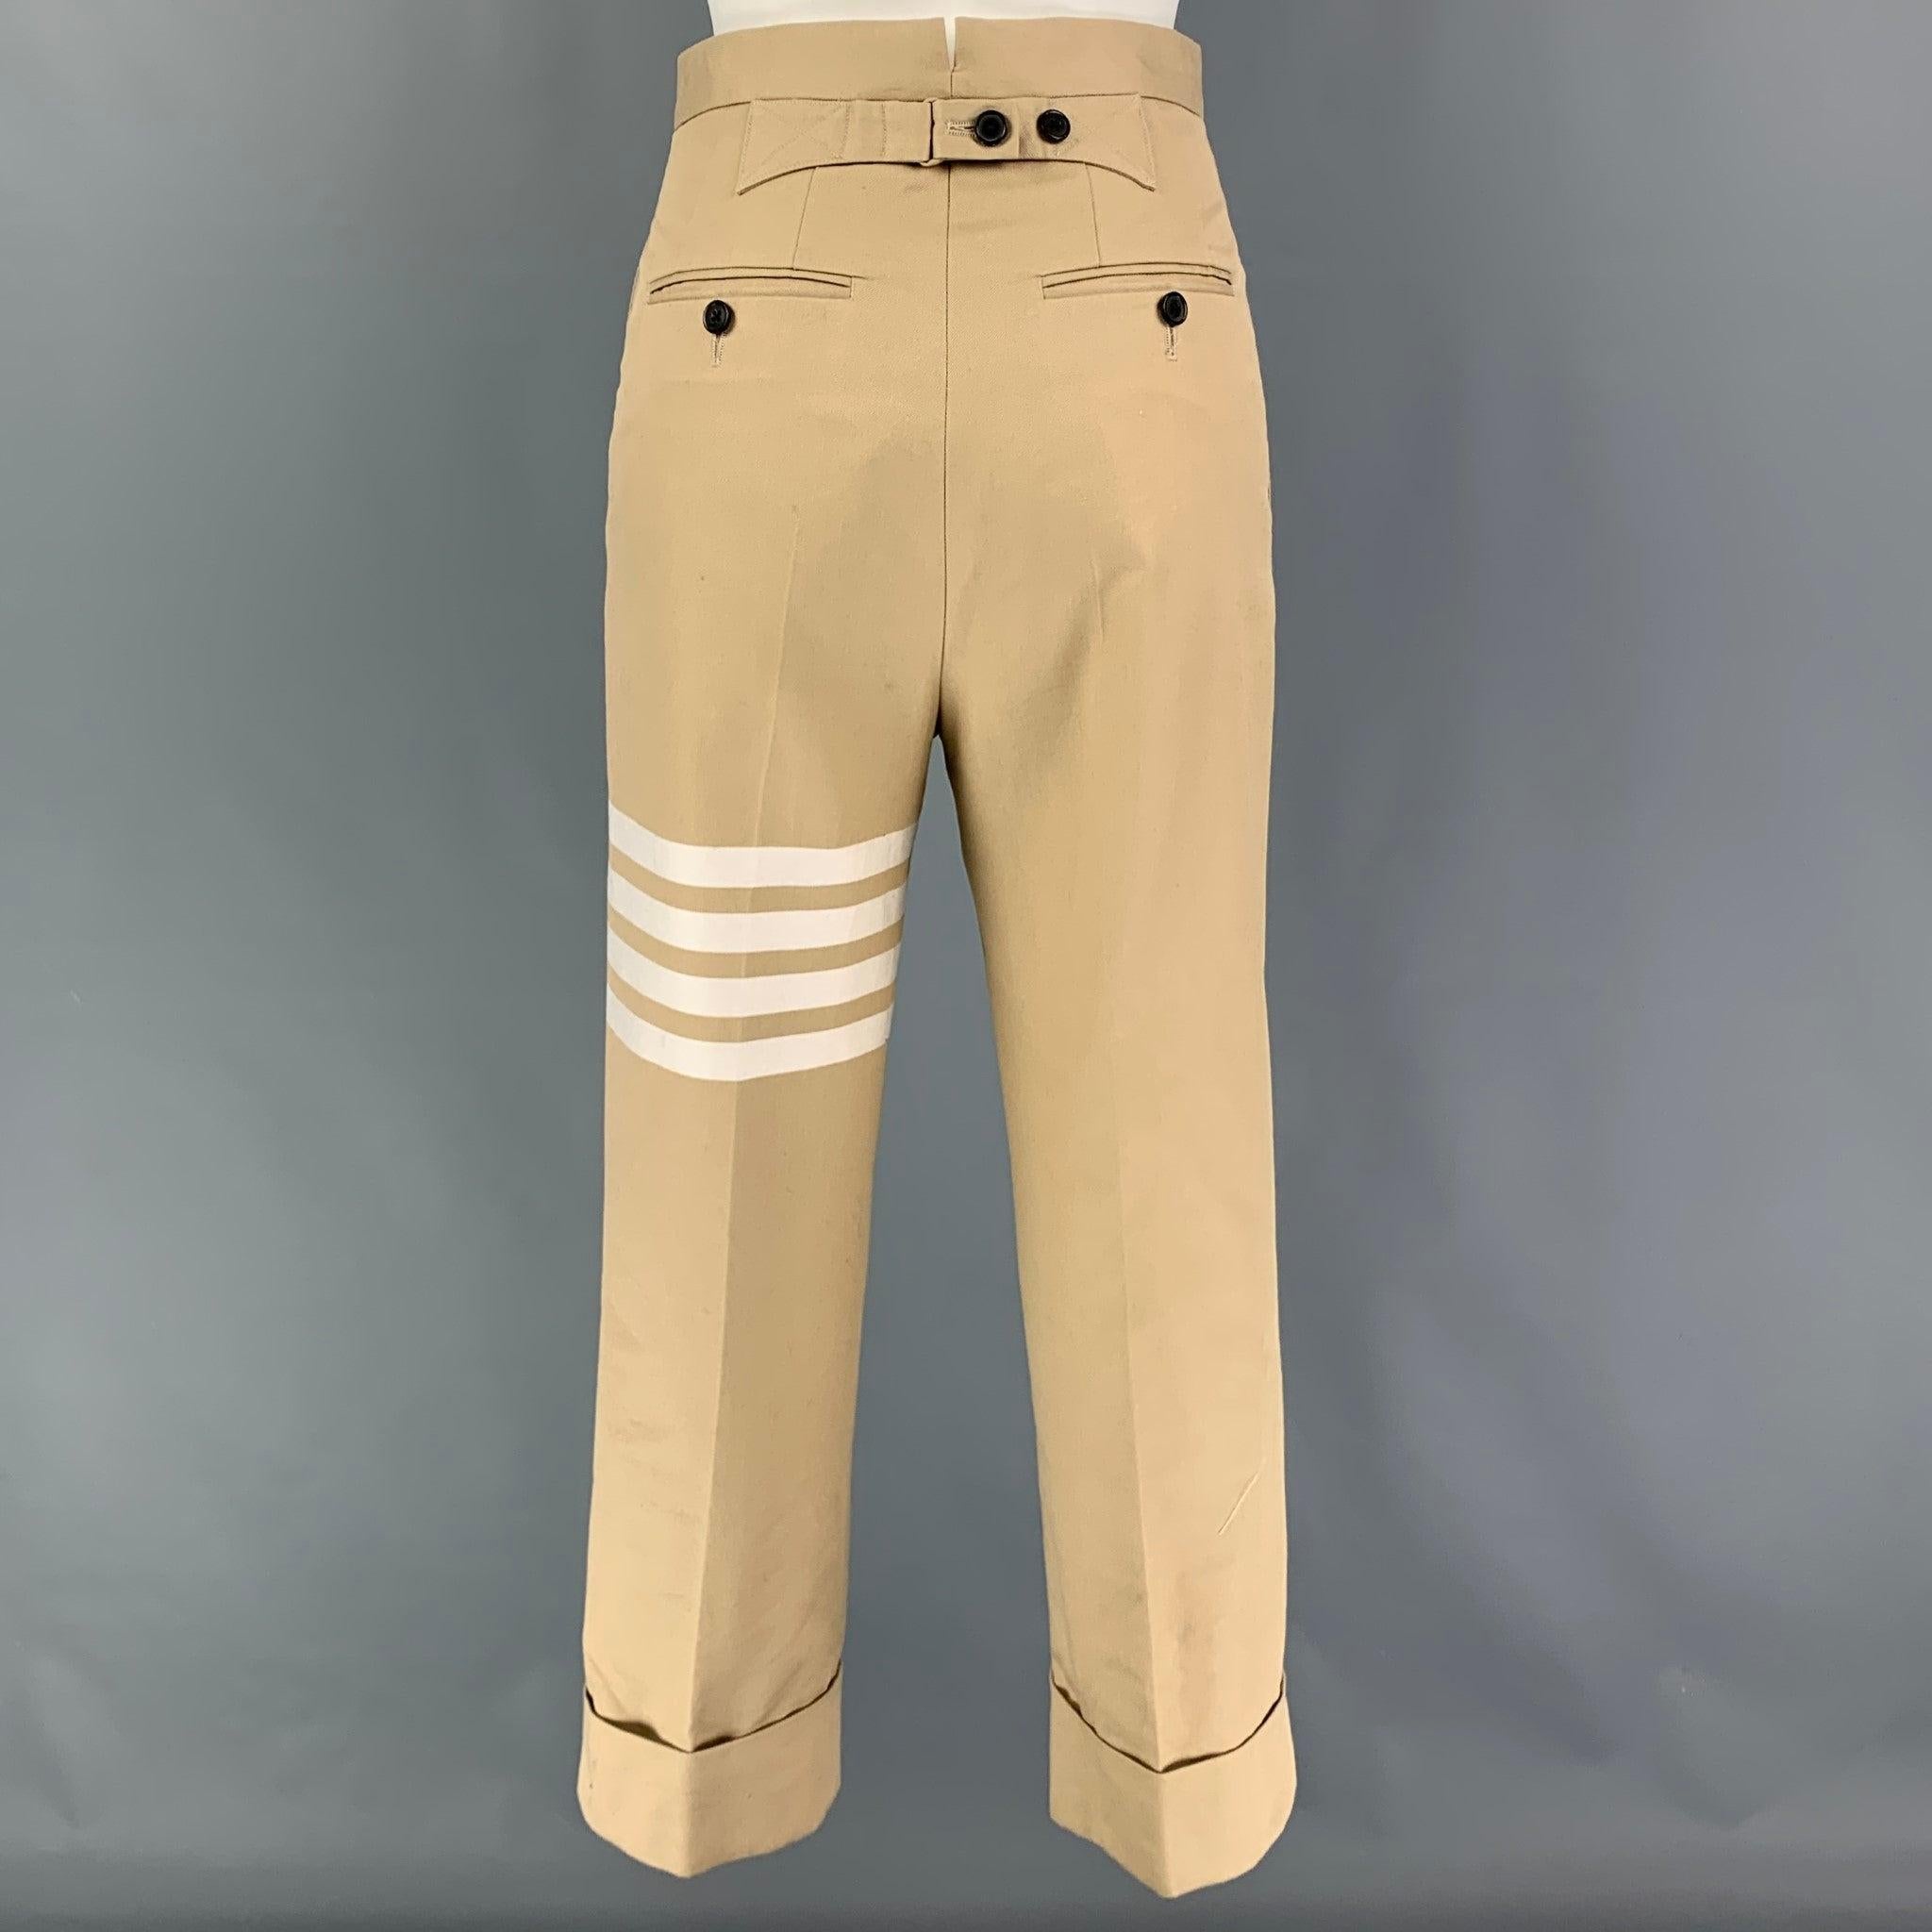 THOM BROWNE pants comes in a khaki cotton featuring a chine style, cuffed leg, striped detail, pleated, front tab, and a zip fly closure. Made in Italy. Very Good
 Pre-Owned Condition. 
 

 Marked:  36 
 

 Measurements: 
  Waist: 26 inches Rise: 13